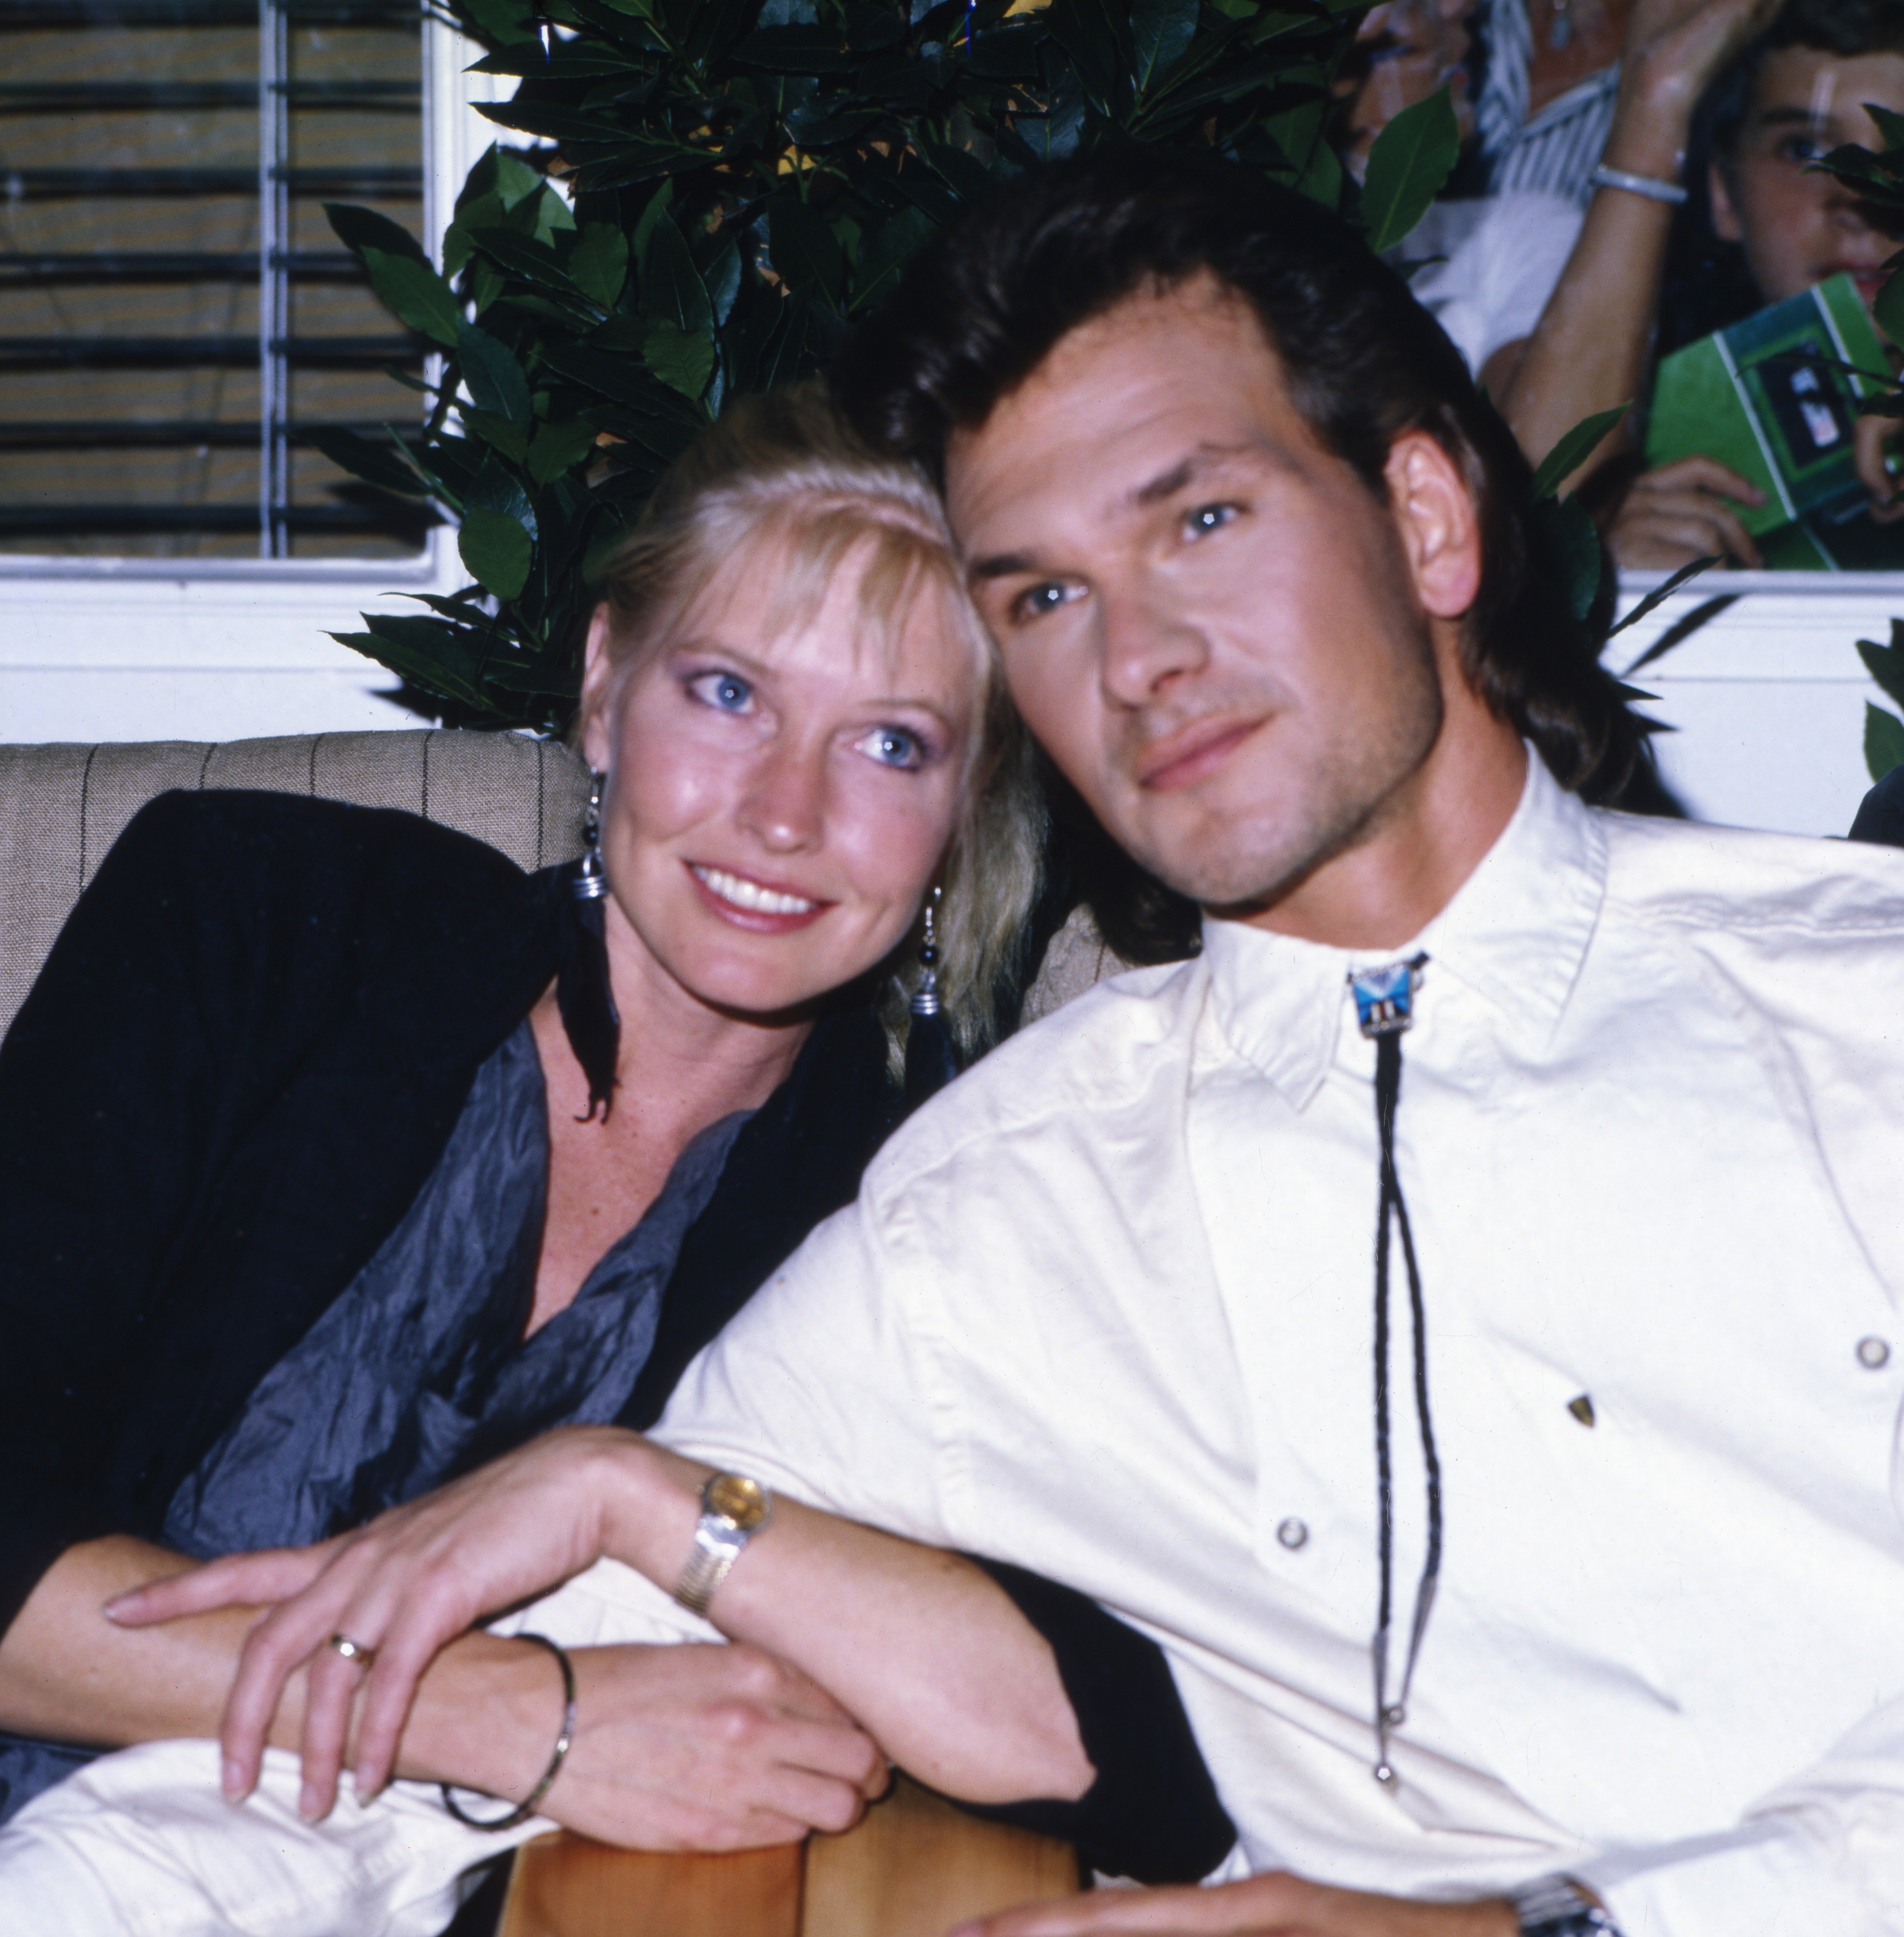 Patrick Swayze and Liza Niemi photographed in the 1980's. | Source: Getty Images